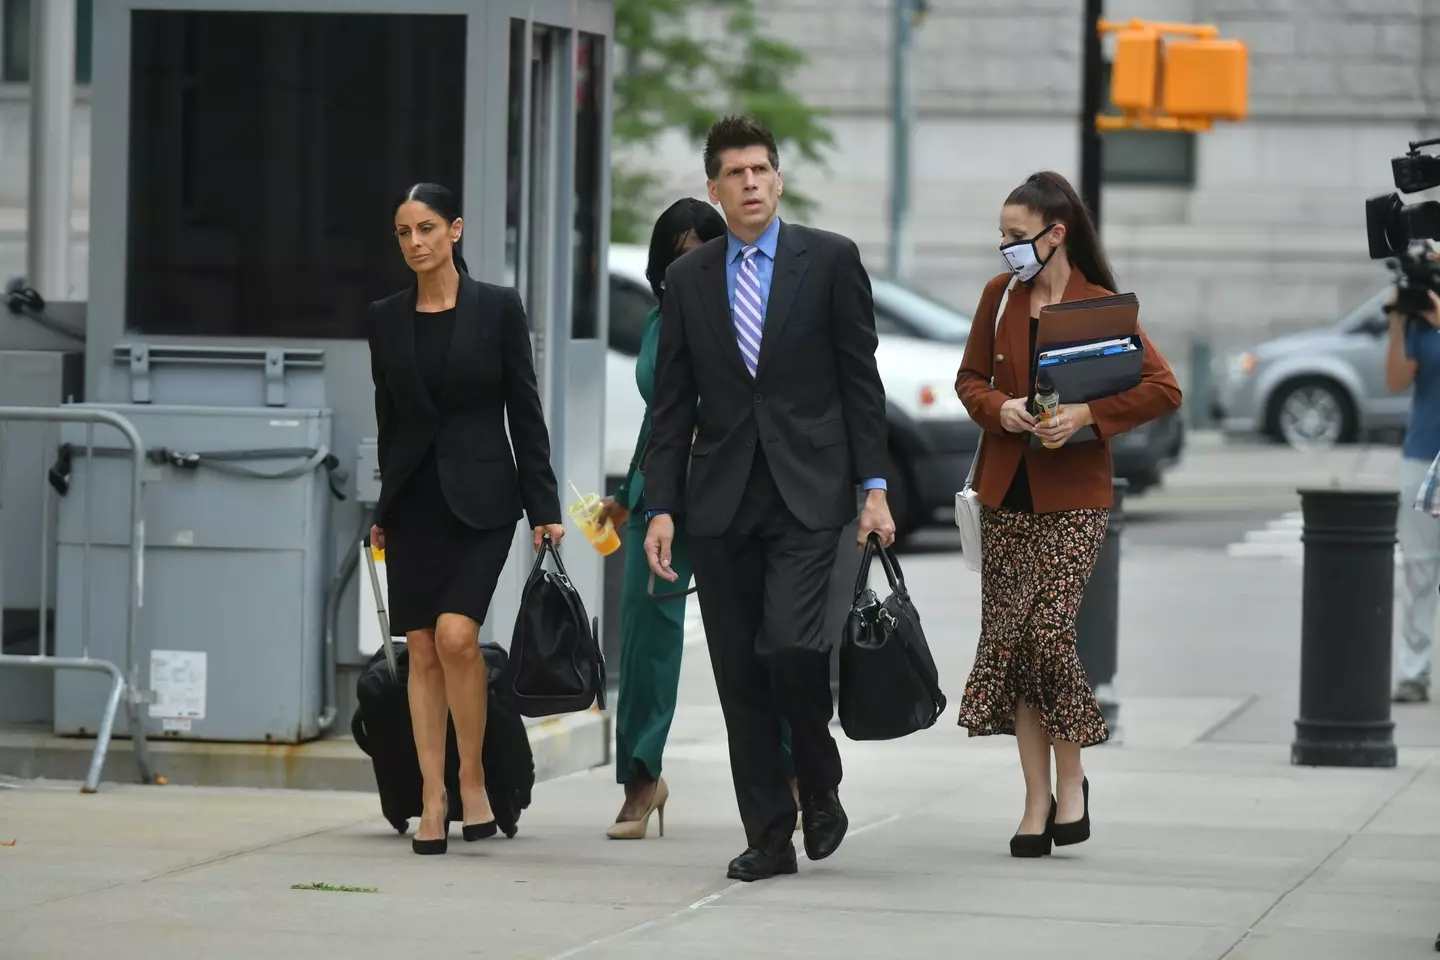 R Kelly's lawyers arriving at the New York courtroom (